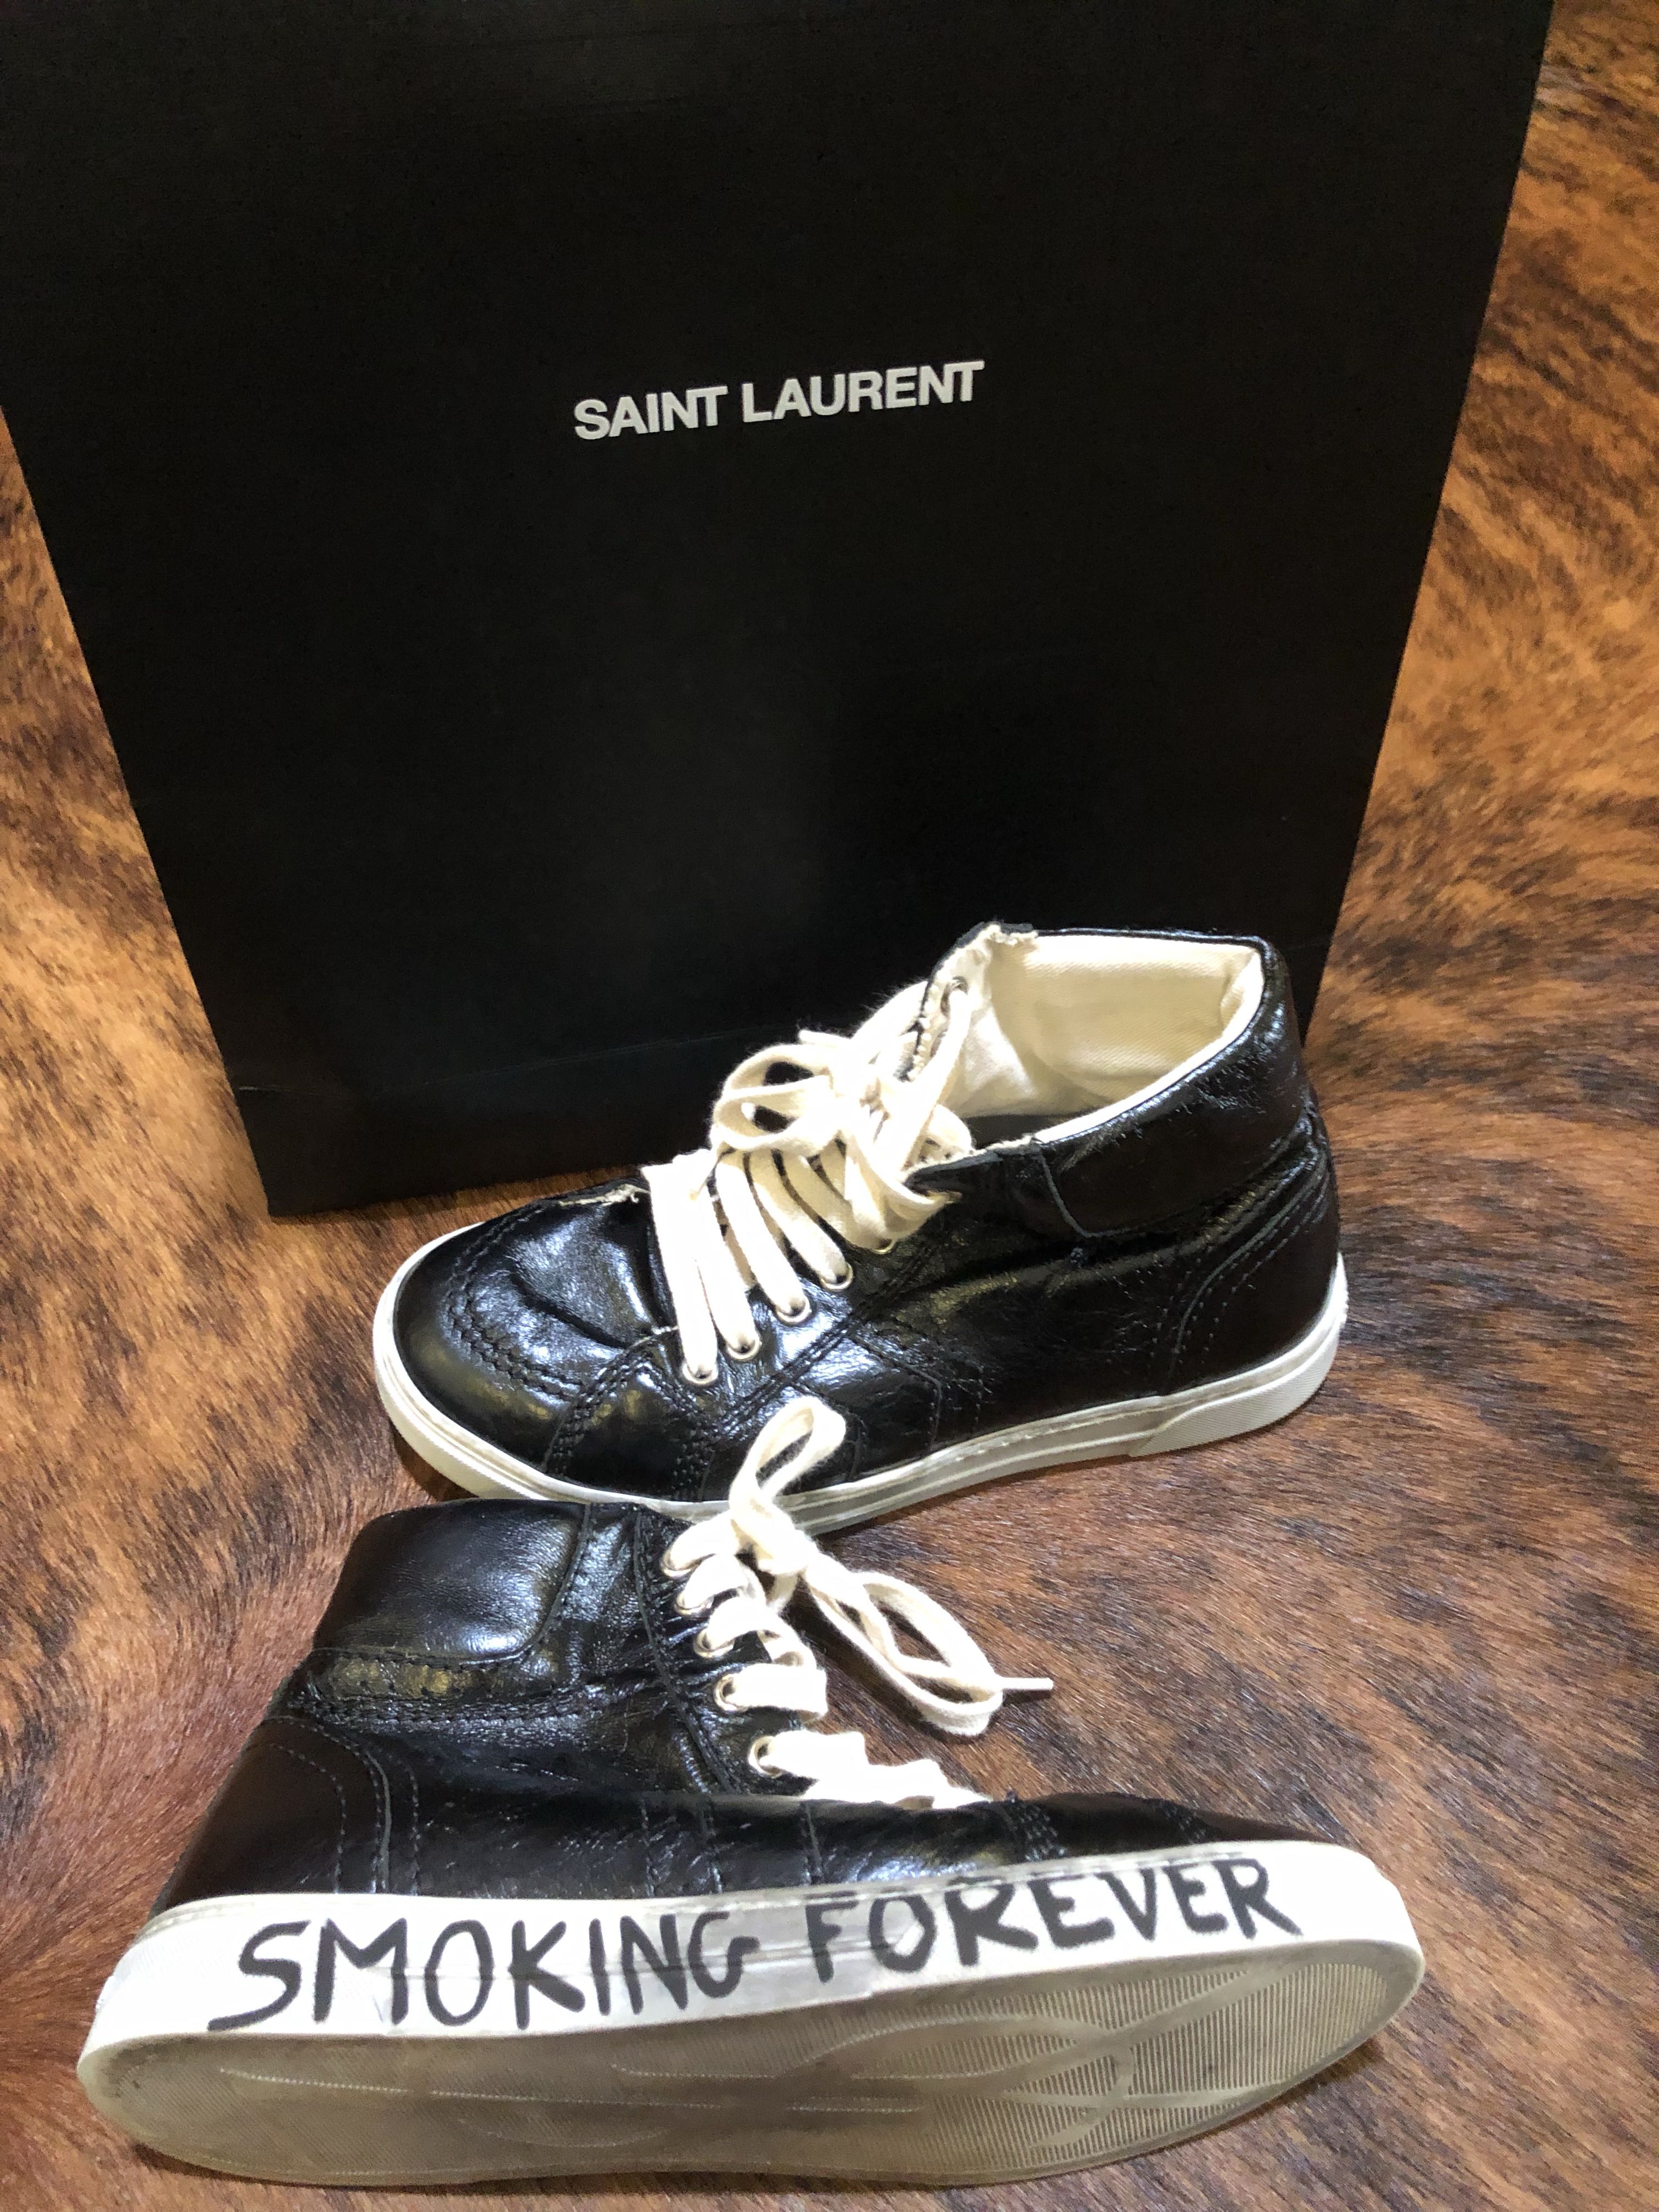 Saint Laurent Smoking Forever Shoes 